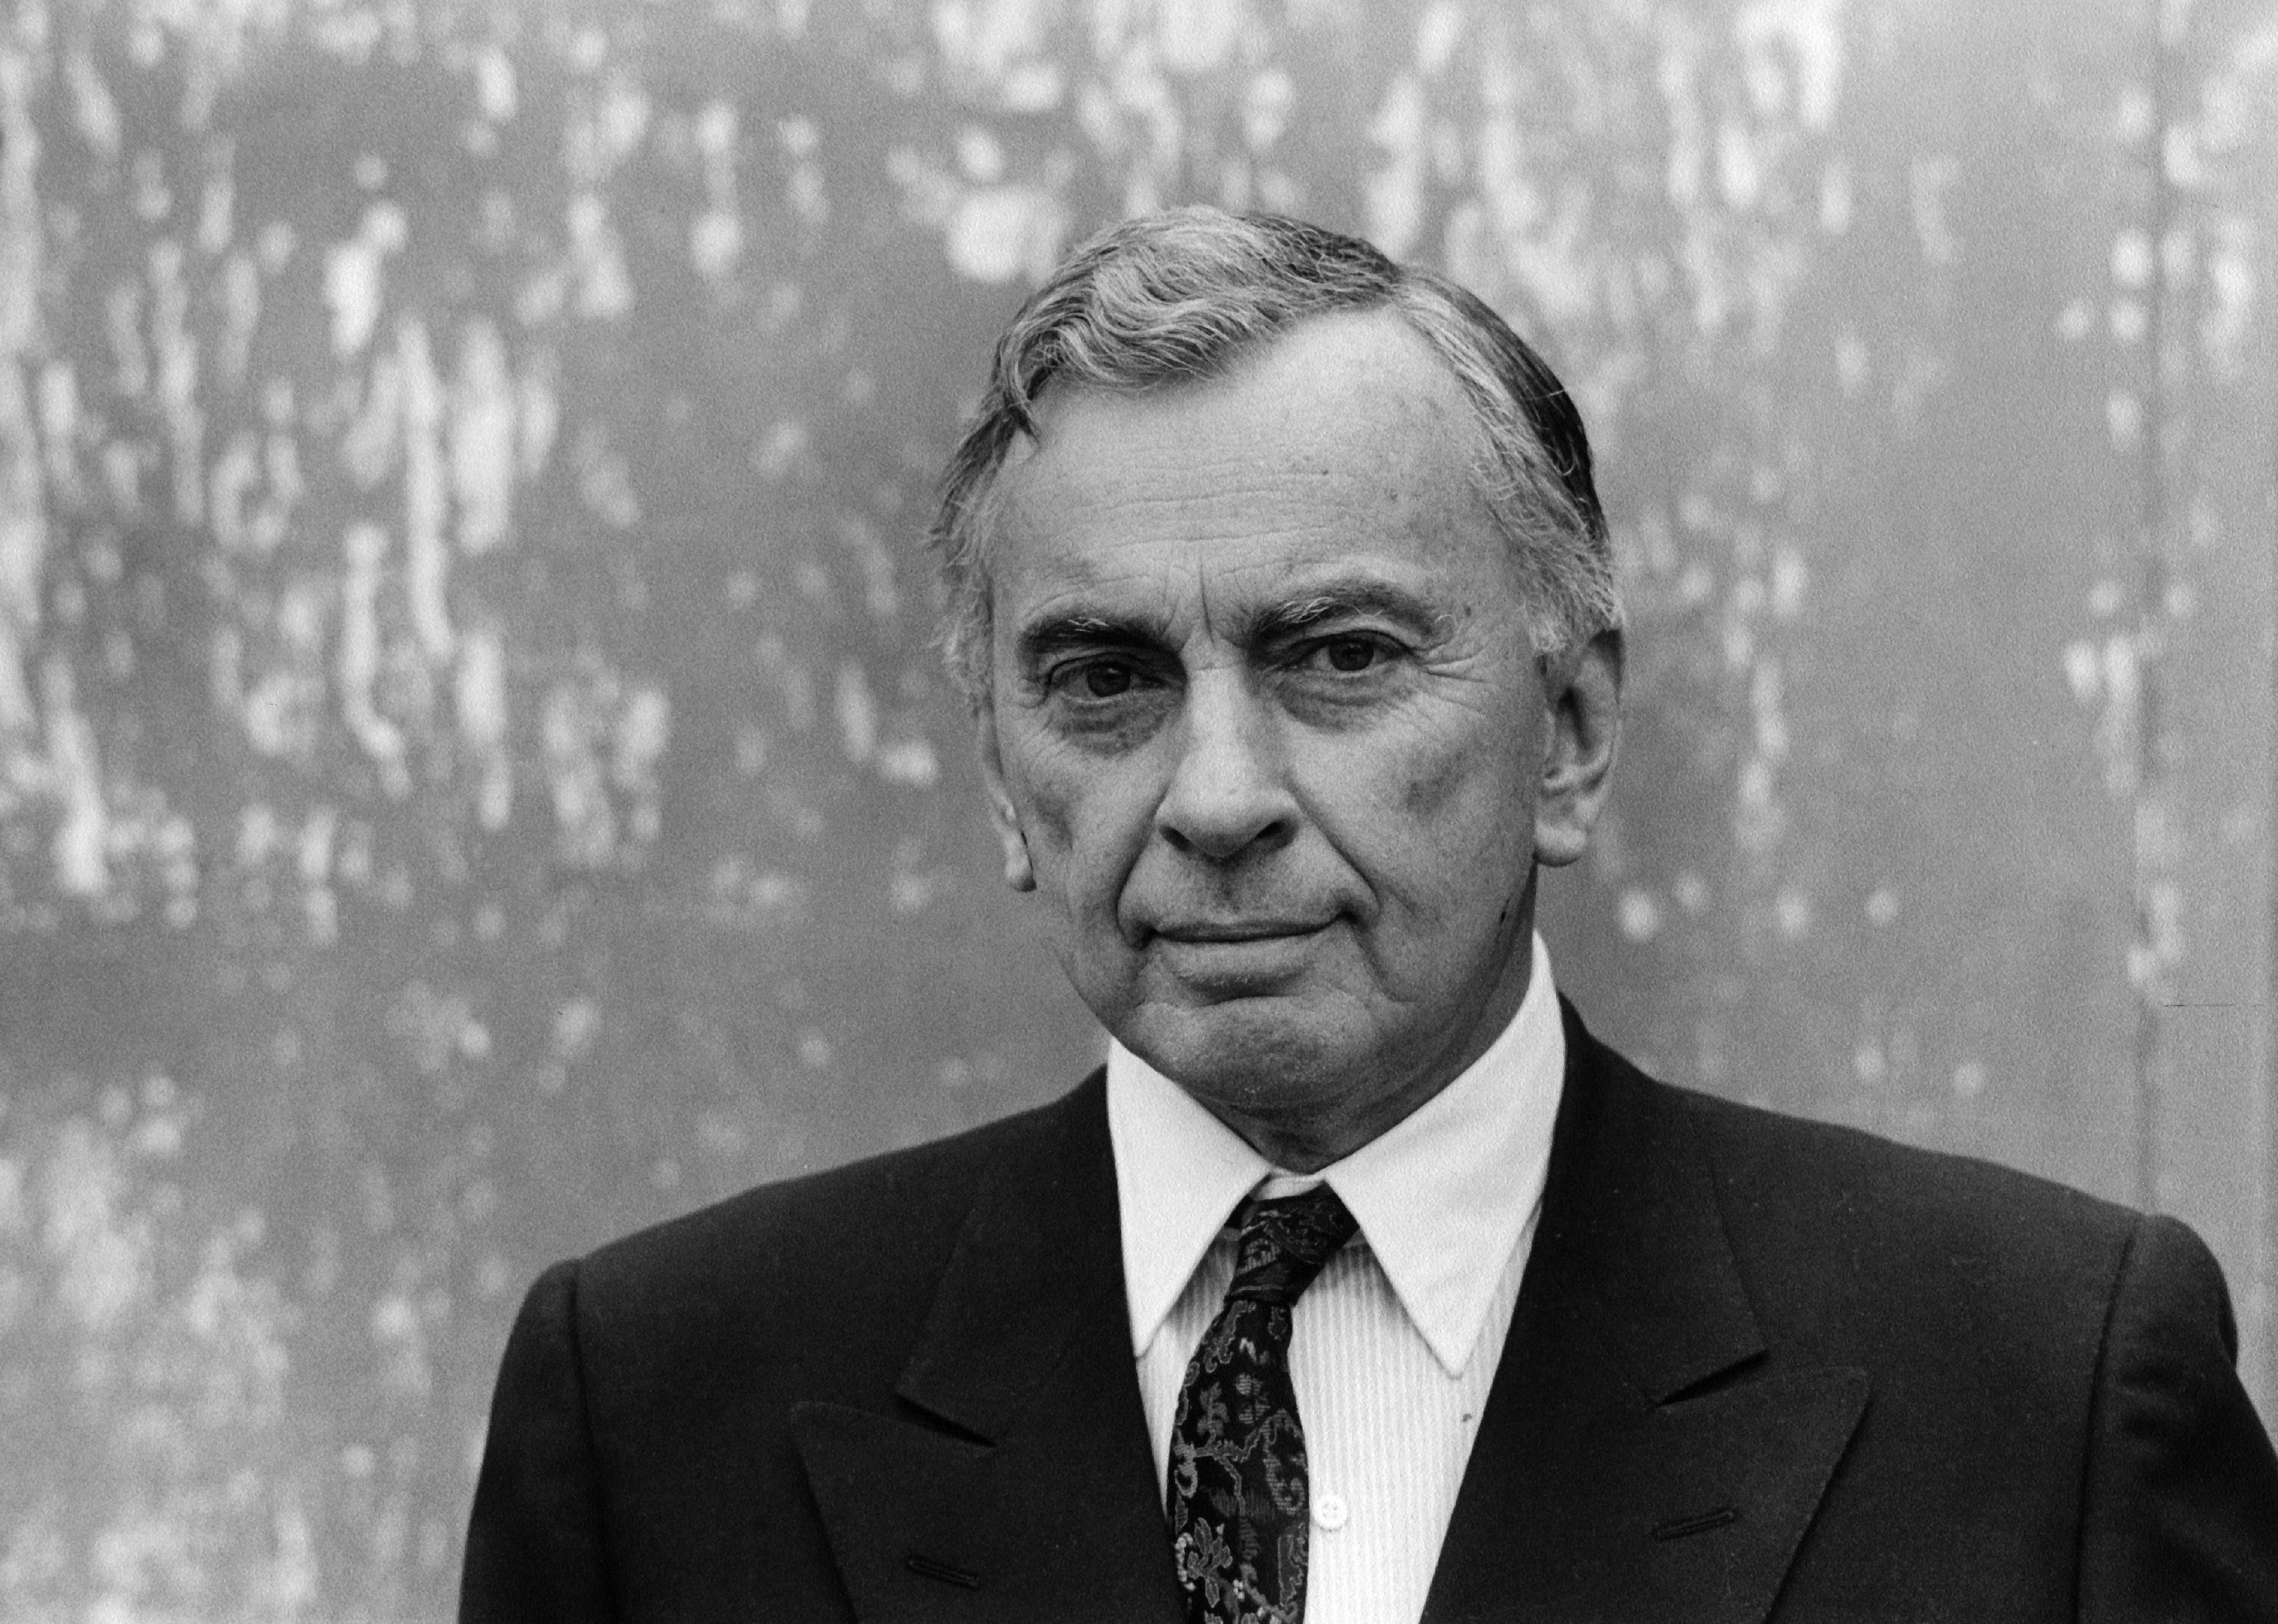 American writer Gore Vidal poses during portrait session.